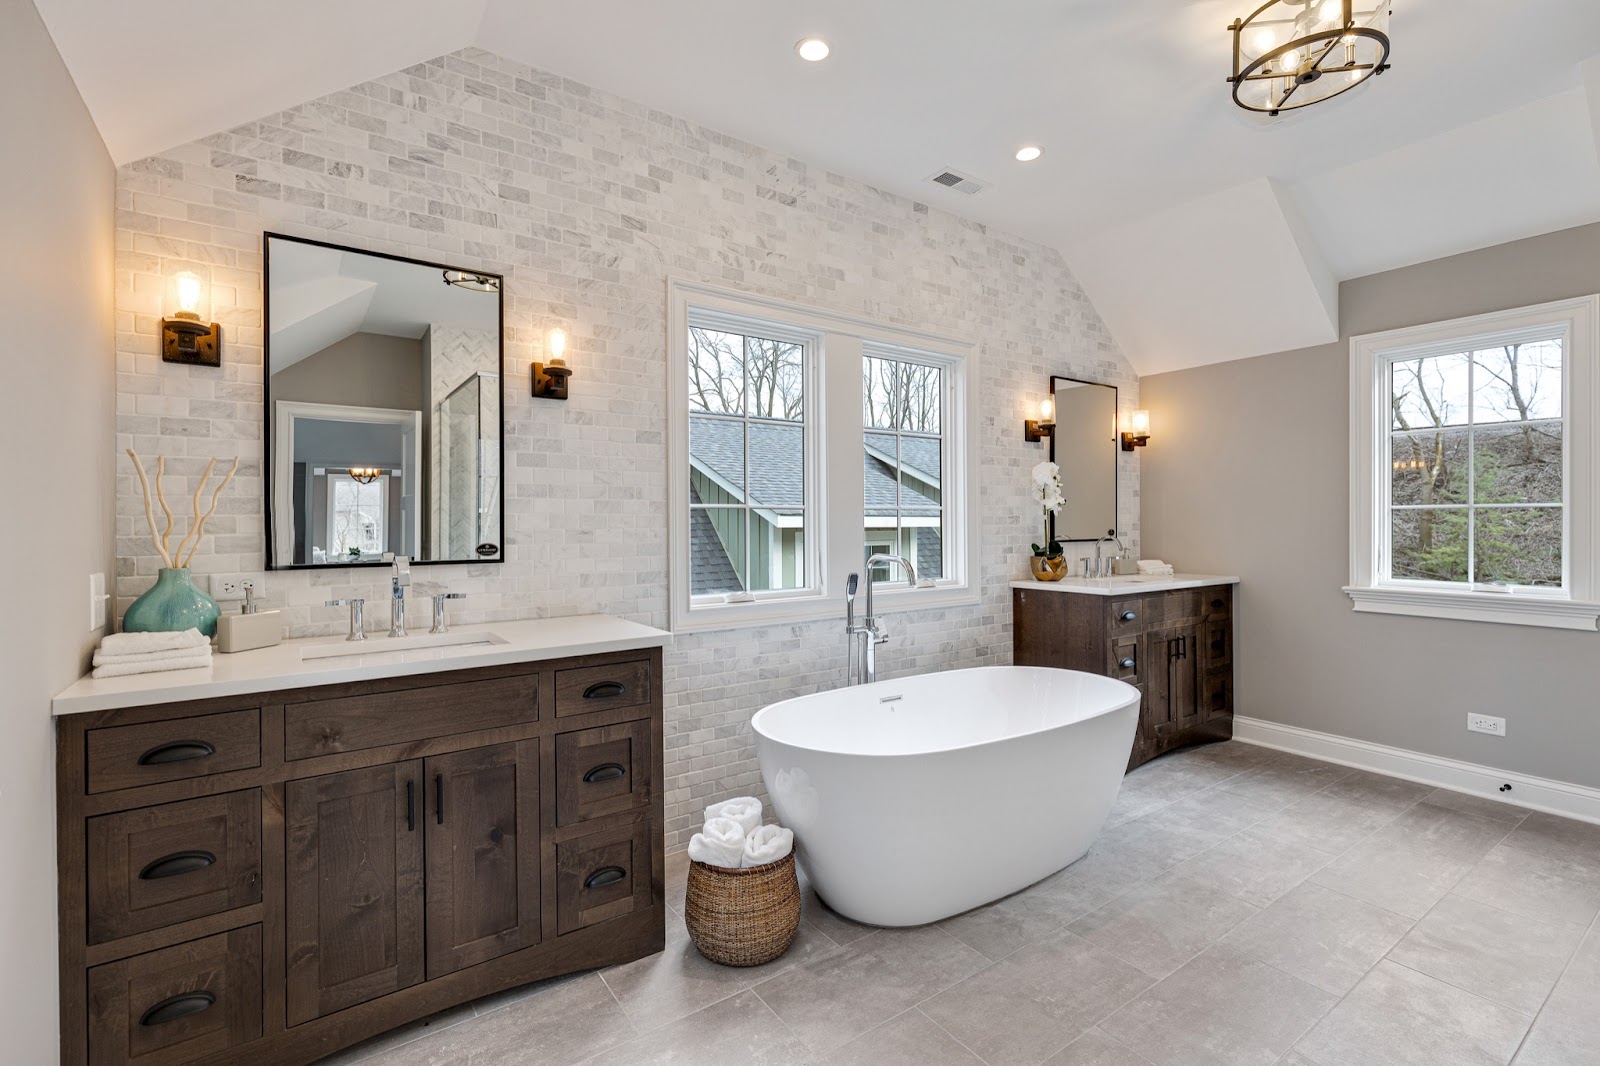 Modern spa master bath with marble tile, natural wood vanities and a large soaking tub underneath a  picture window.